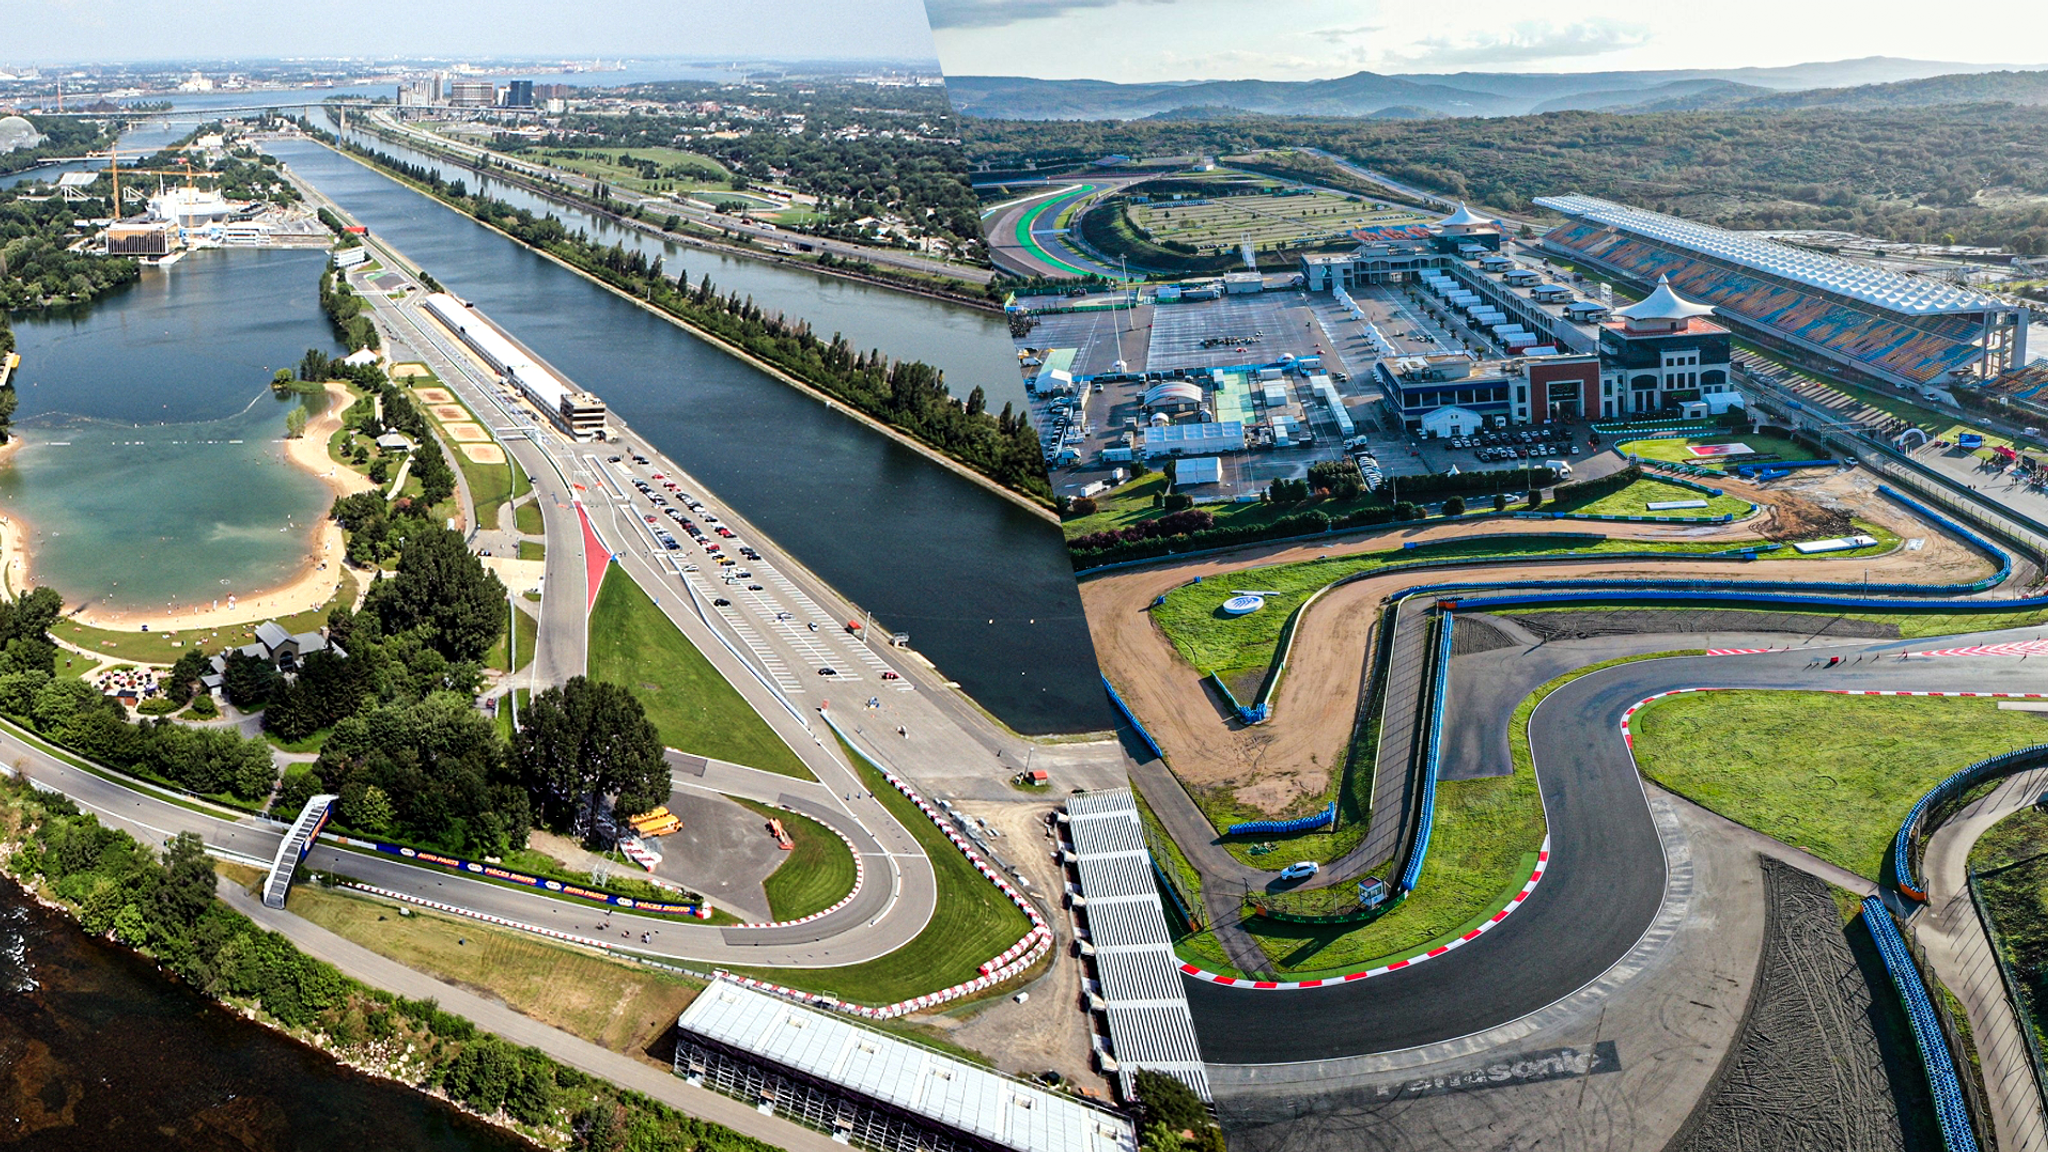 Canadian GP replaced on F1 2021 calendar by Turkish GP due to Covid-19 travel restrictions F1 News